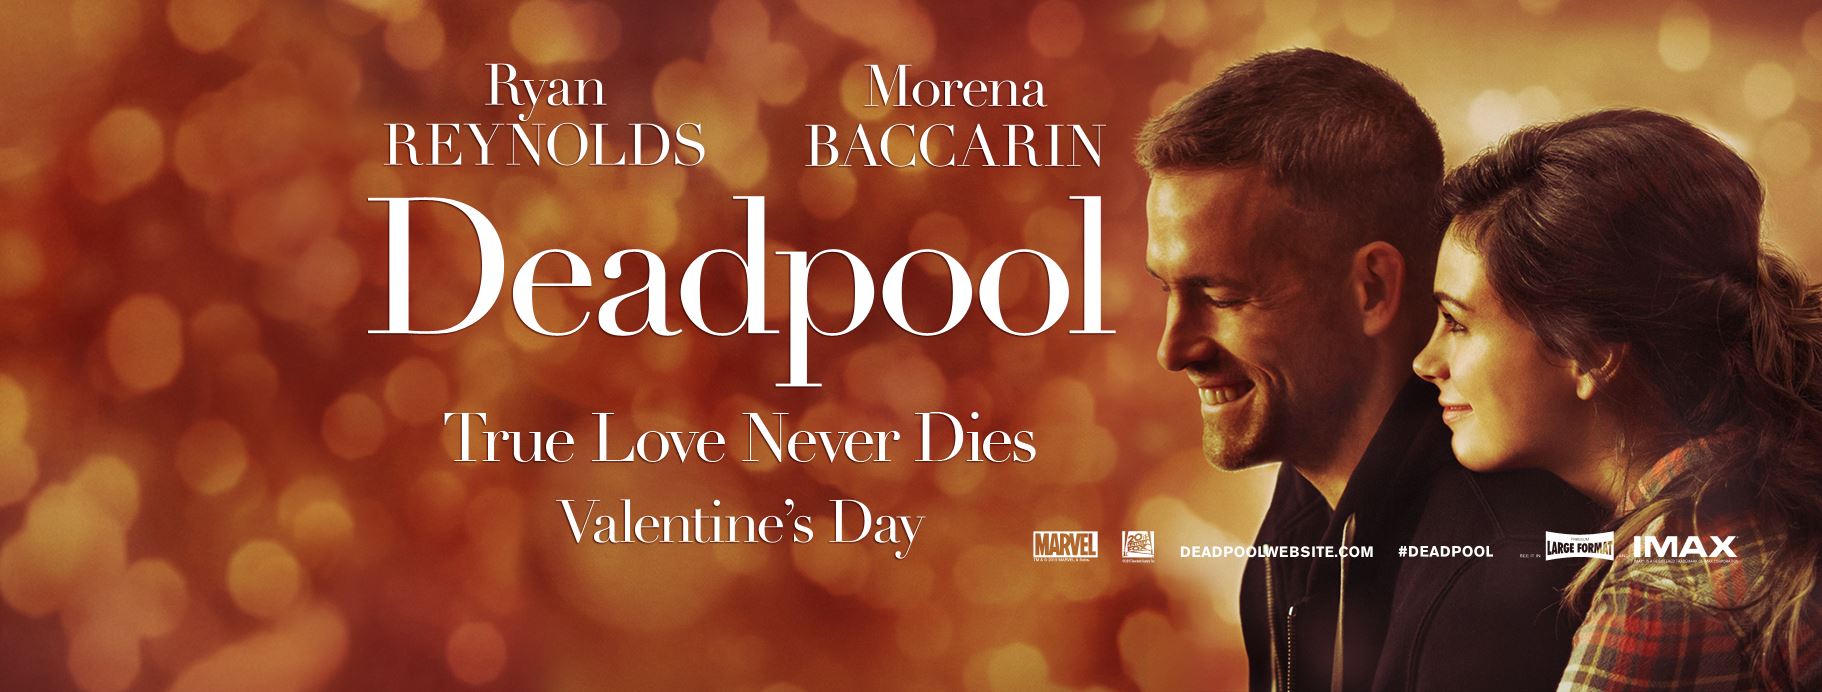 24 Deadpool Valentines New Deadpool Trailer Rumored To Arrive Valentine’s Day